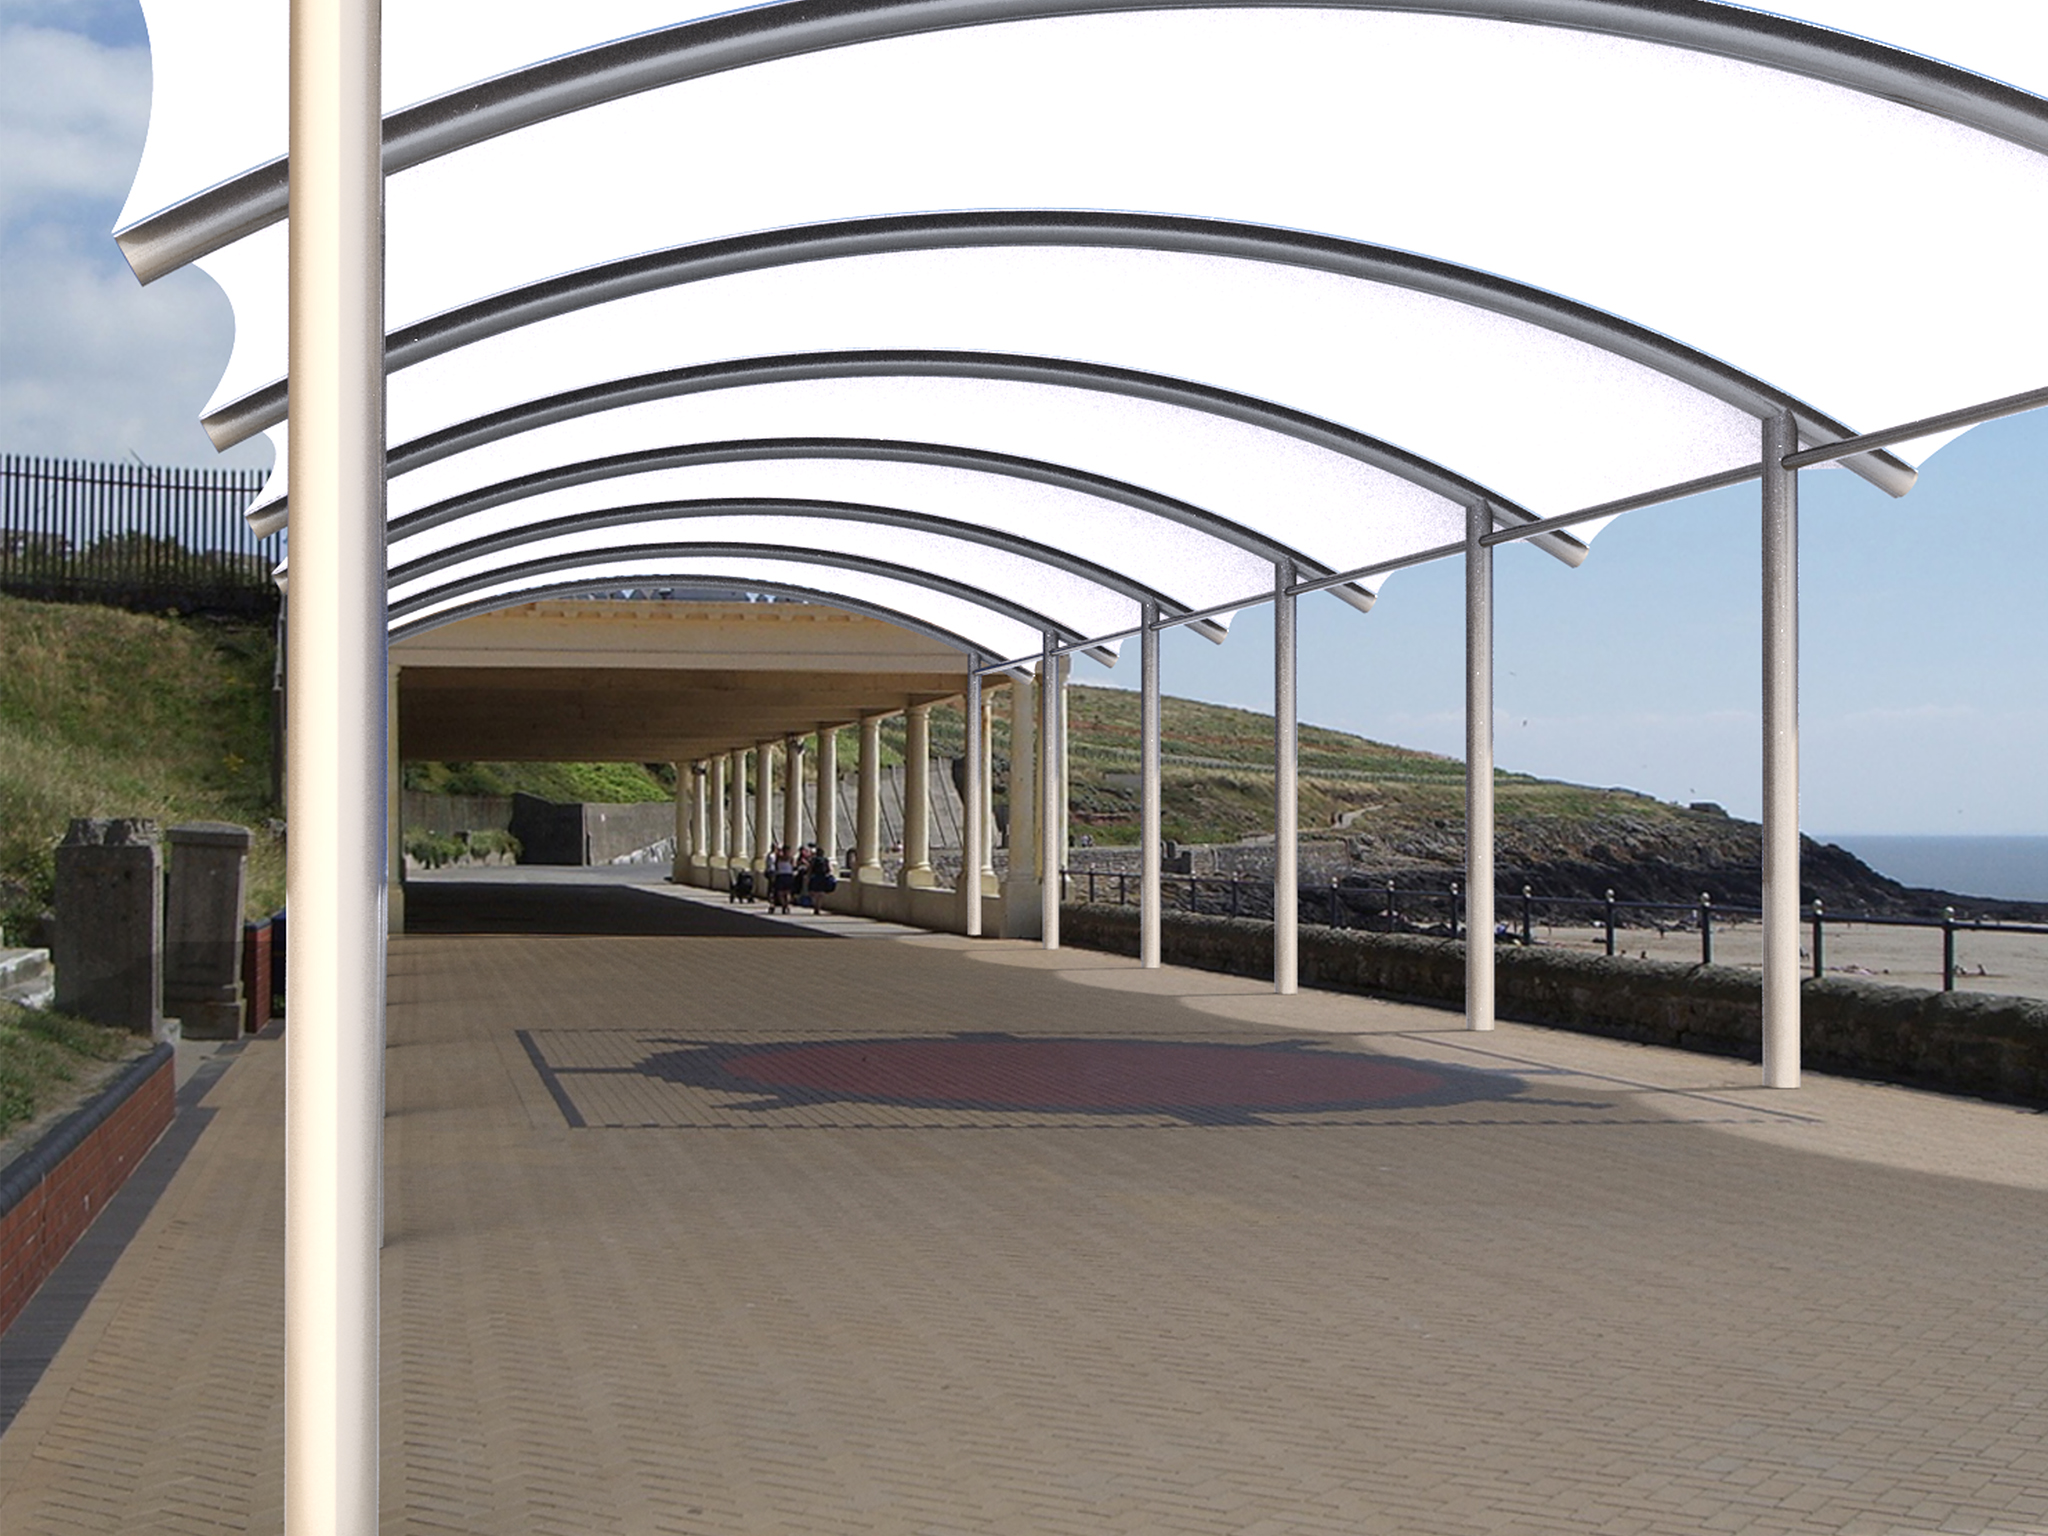 Shades Sails Canopies And Awnings For Commercial And Aviation